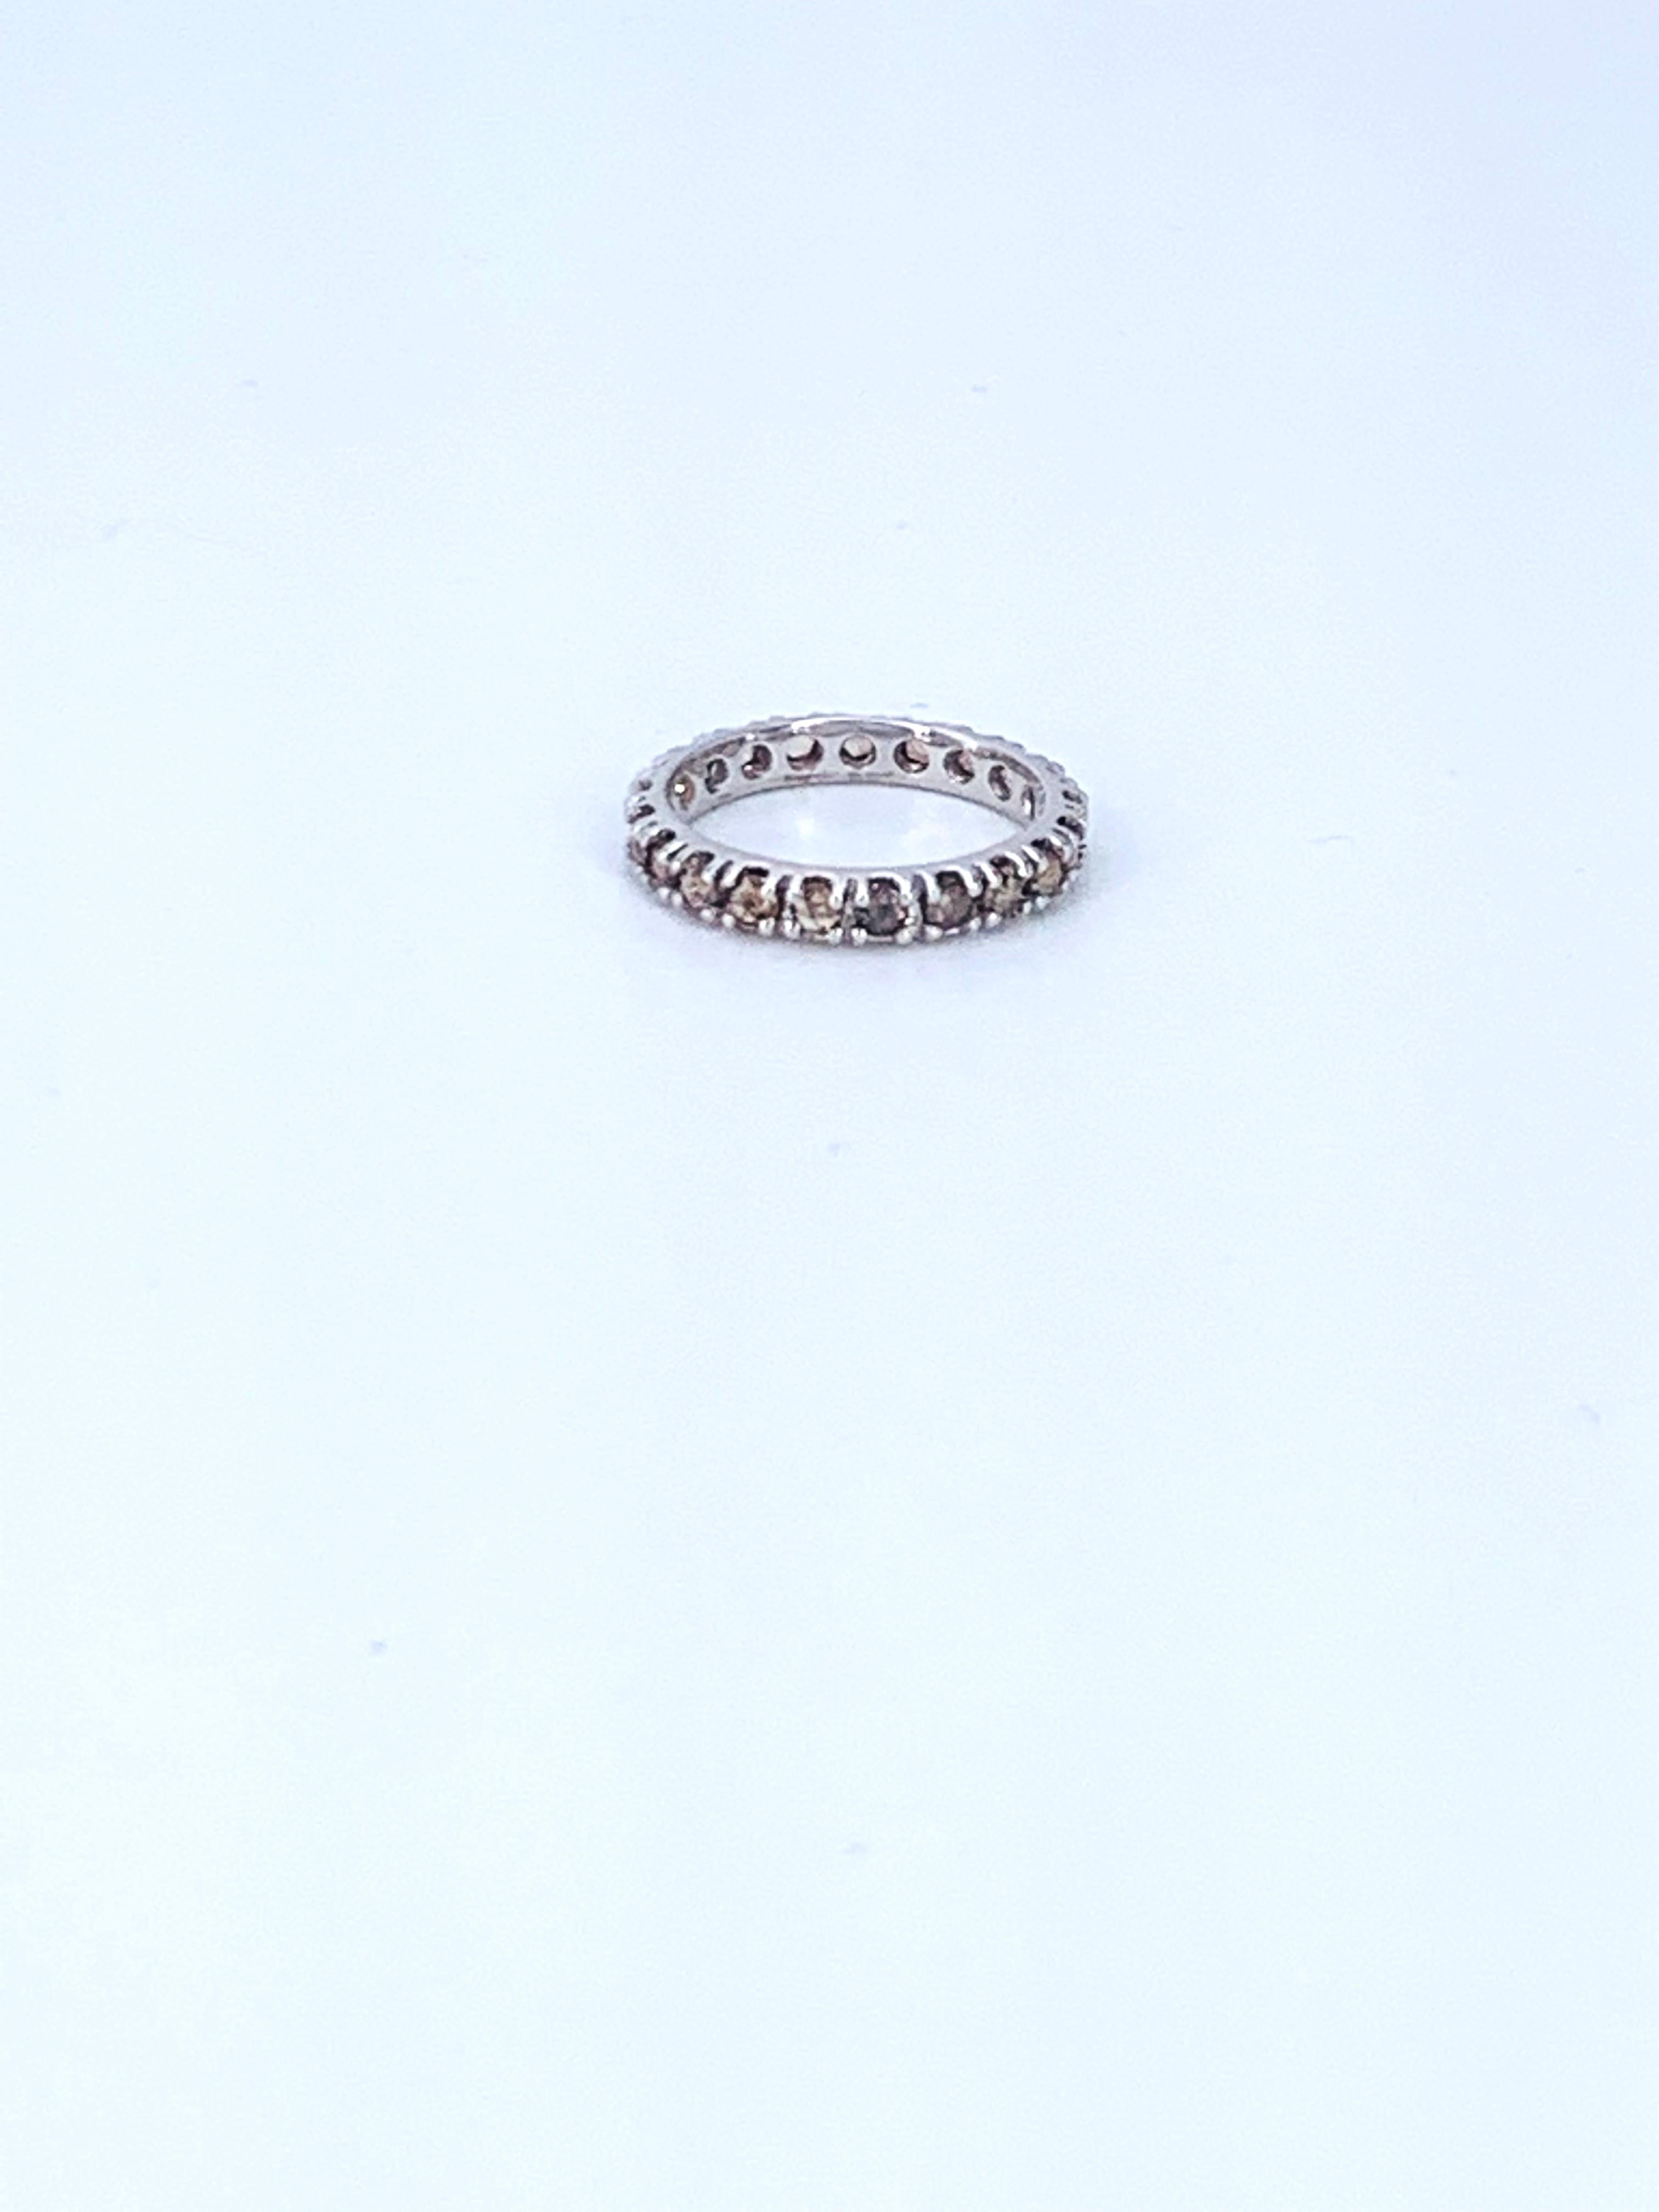 This amber Diamond eternity 18kt White Gold Ring is unisex.

The amber Diamonds radiate a unique light orange, hint of brown in the stones making them warm and cool at the same time. 

As an eternity ring it boasts Rose cut Diamonds from the Corone